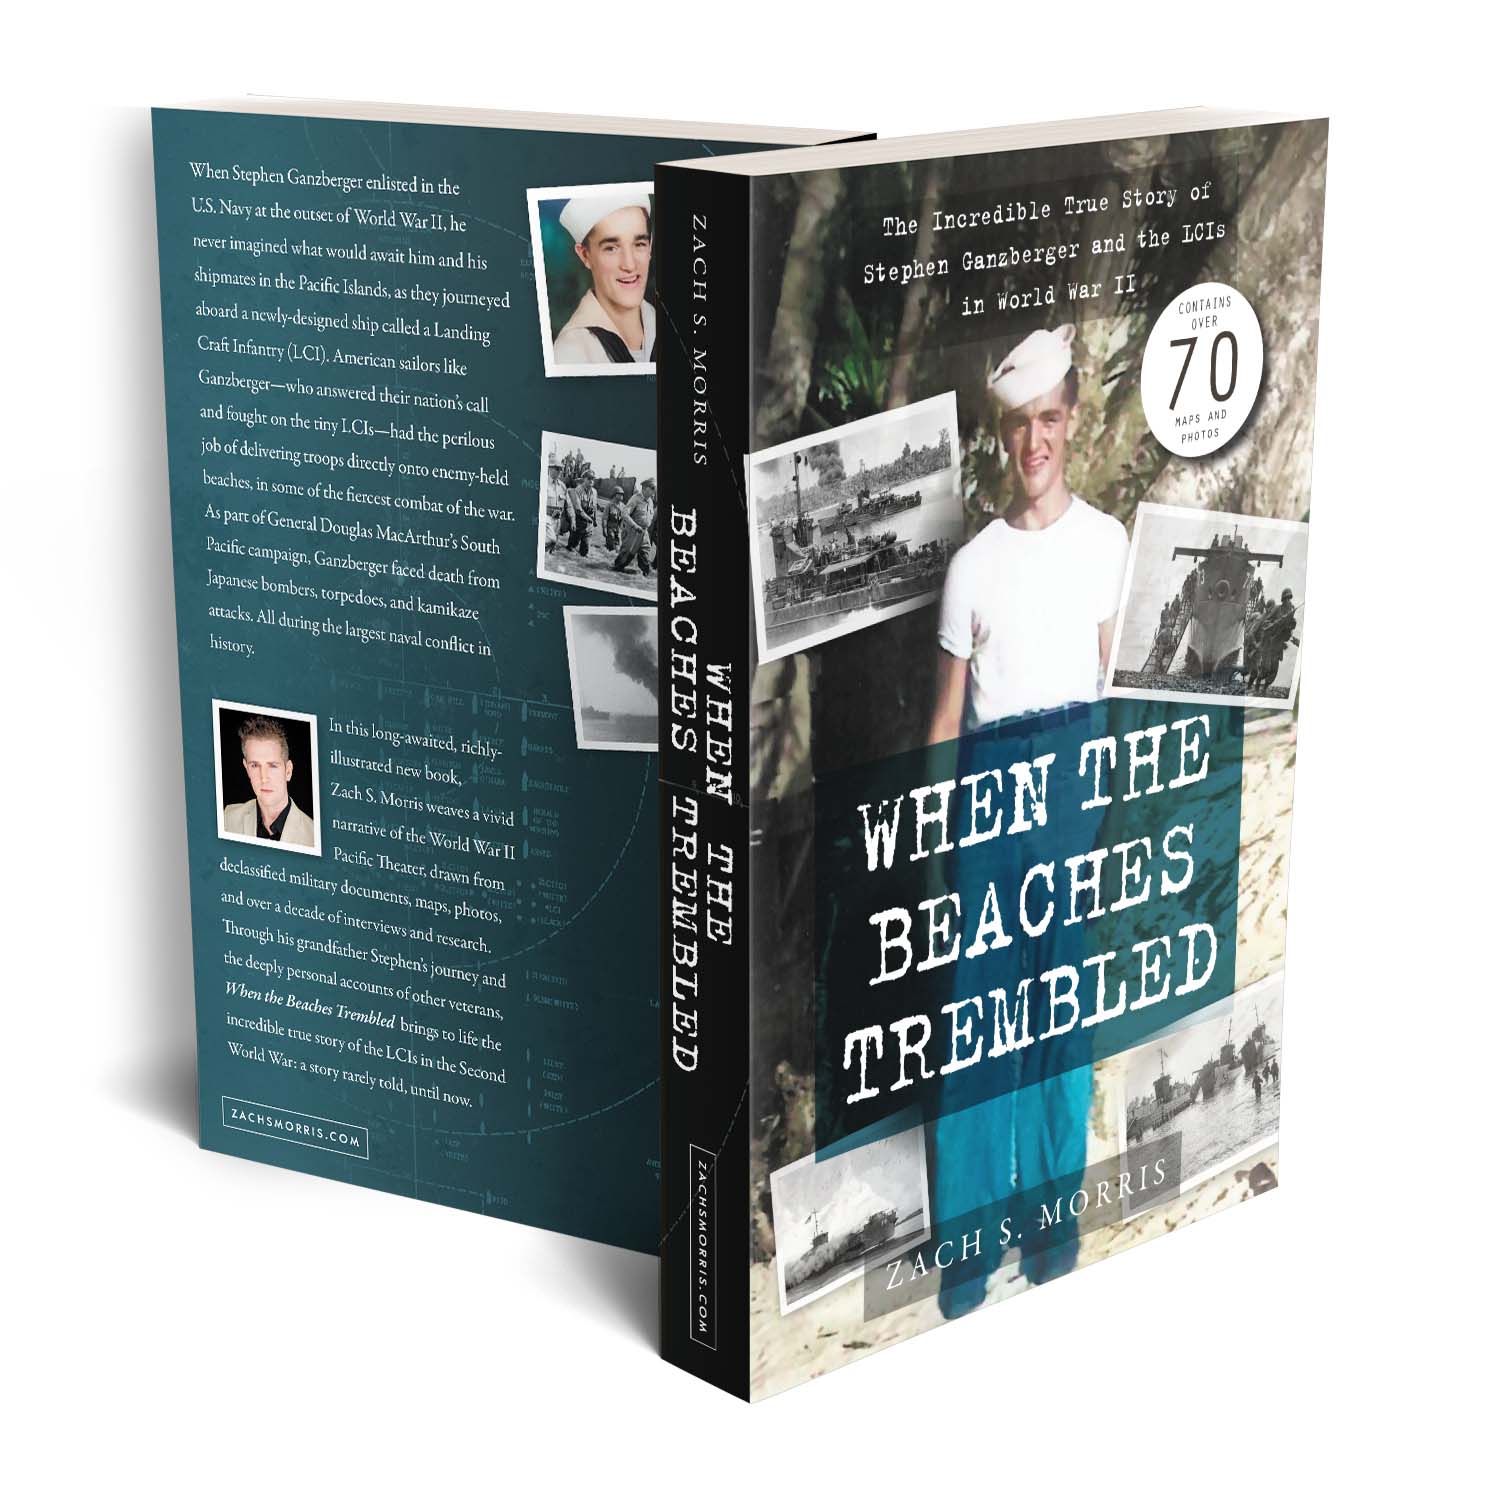 'When The Beaches Trembled' is an emotive, detailed illustrated memoir of life aboard an LCI ship during the Pacific campaigns of World War 2. The author is Zach S. Morris. The book cover was designed by Mark Thomas of coverness.com. To find out more about my book design services, please visit www.coverness.com